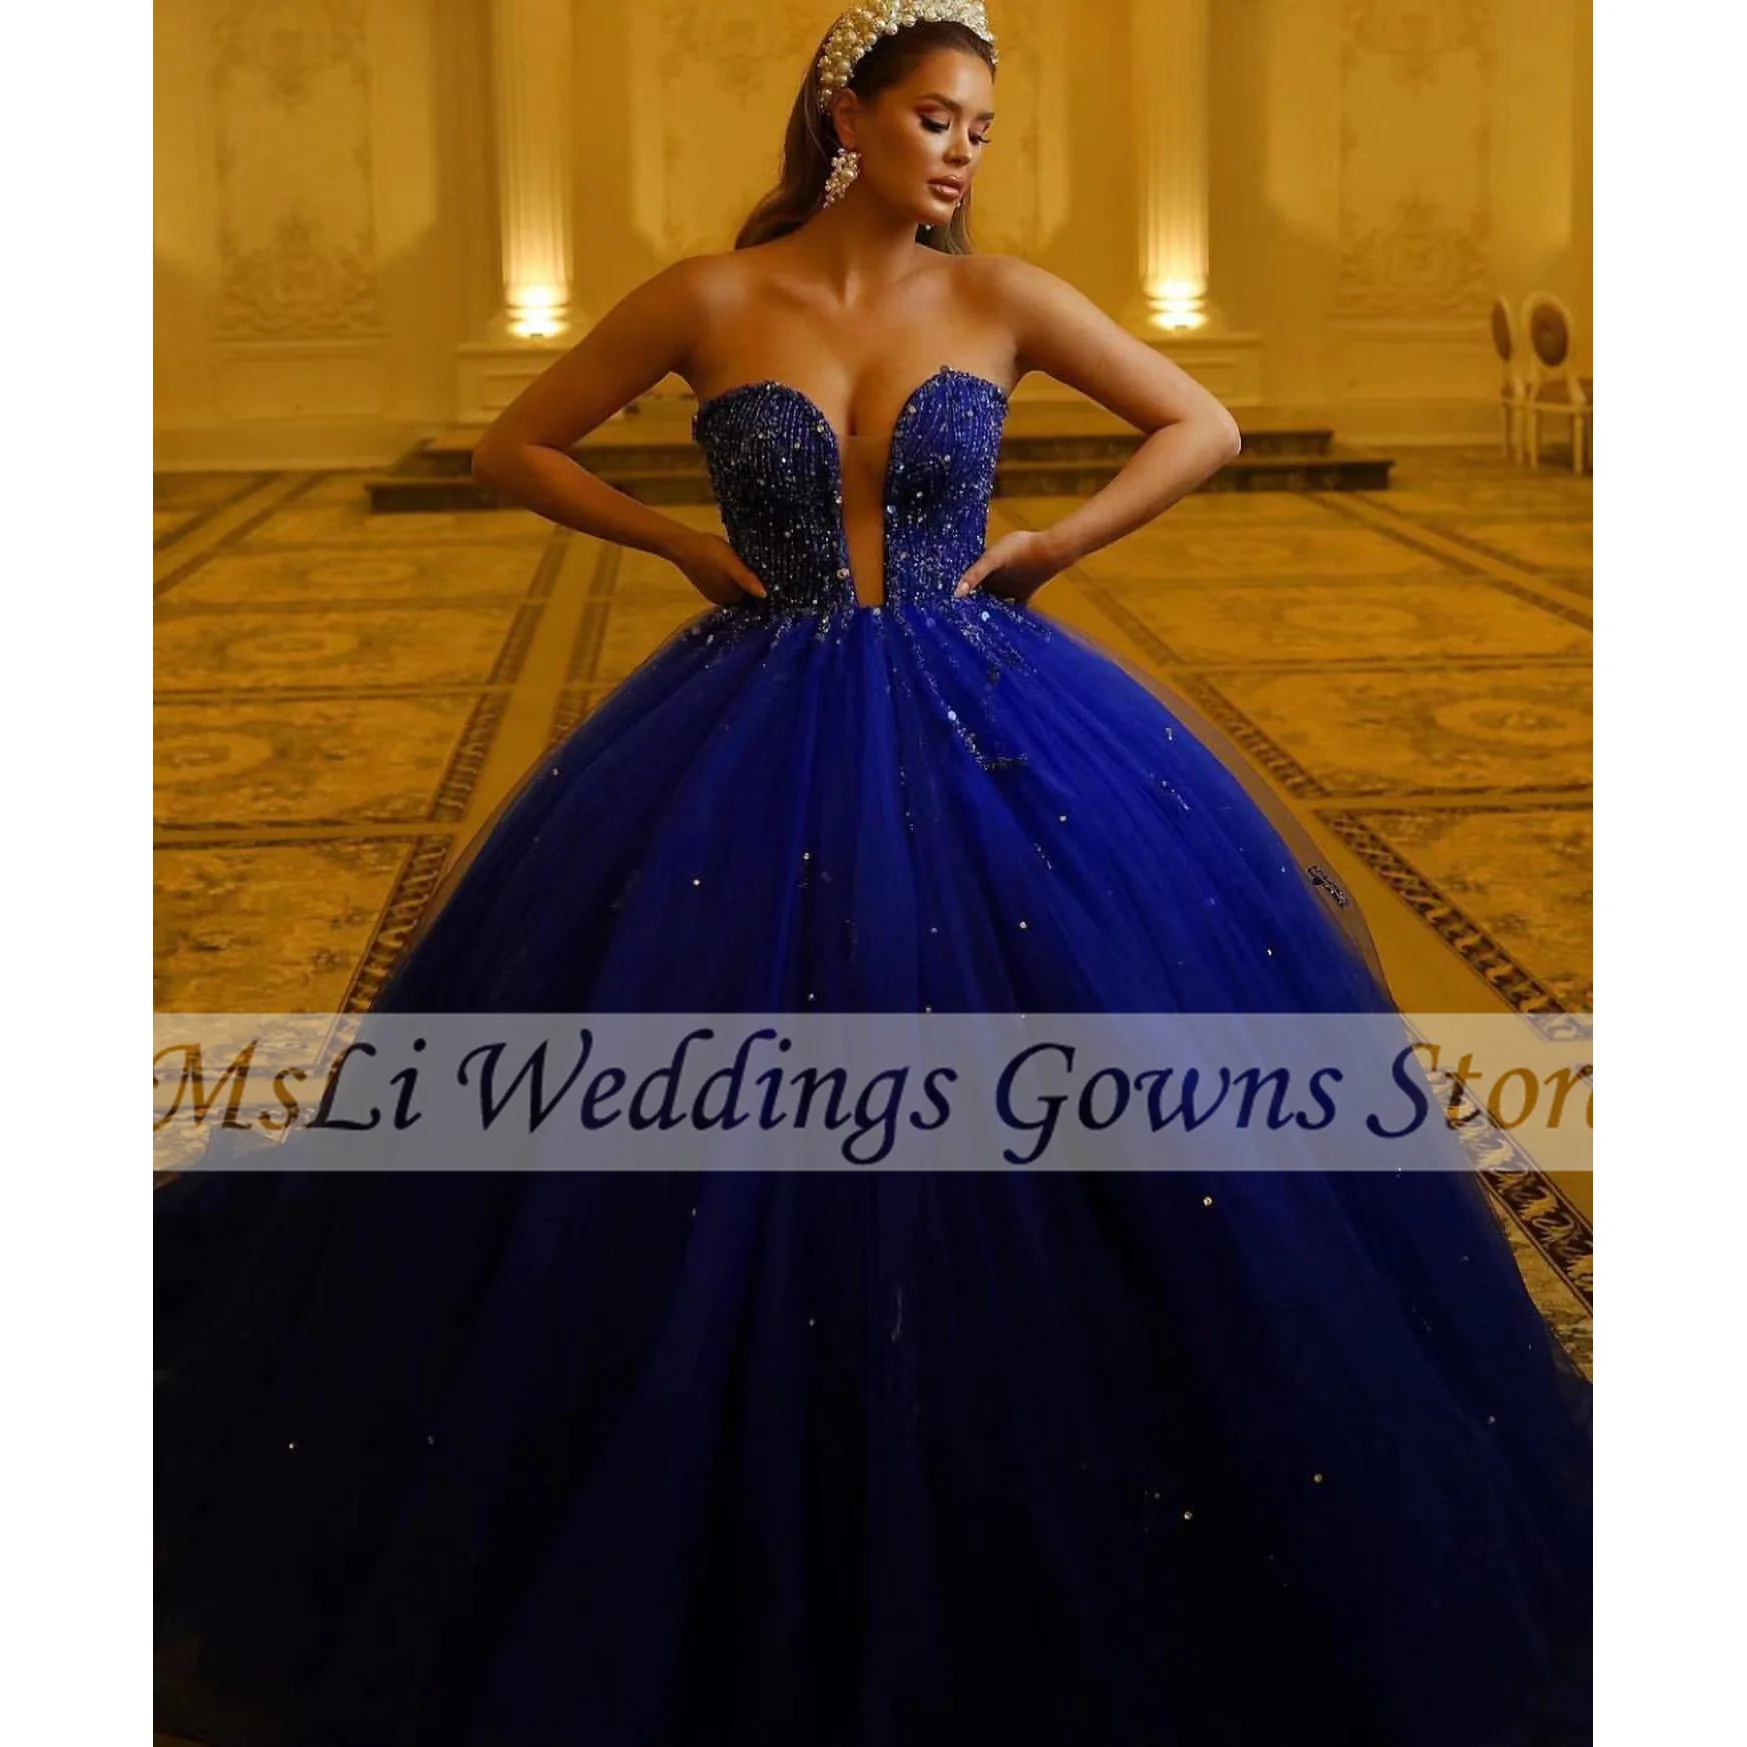 

Royal Blue Quinceanera Dresses For Sweet 16 Girls Beads Sequined Strapless Sleeveless Birthday Prom Dresses vestidos de 15 años